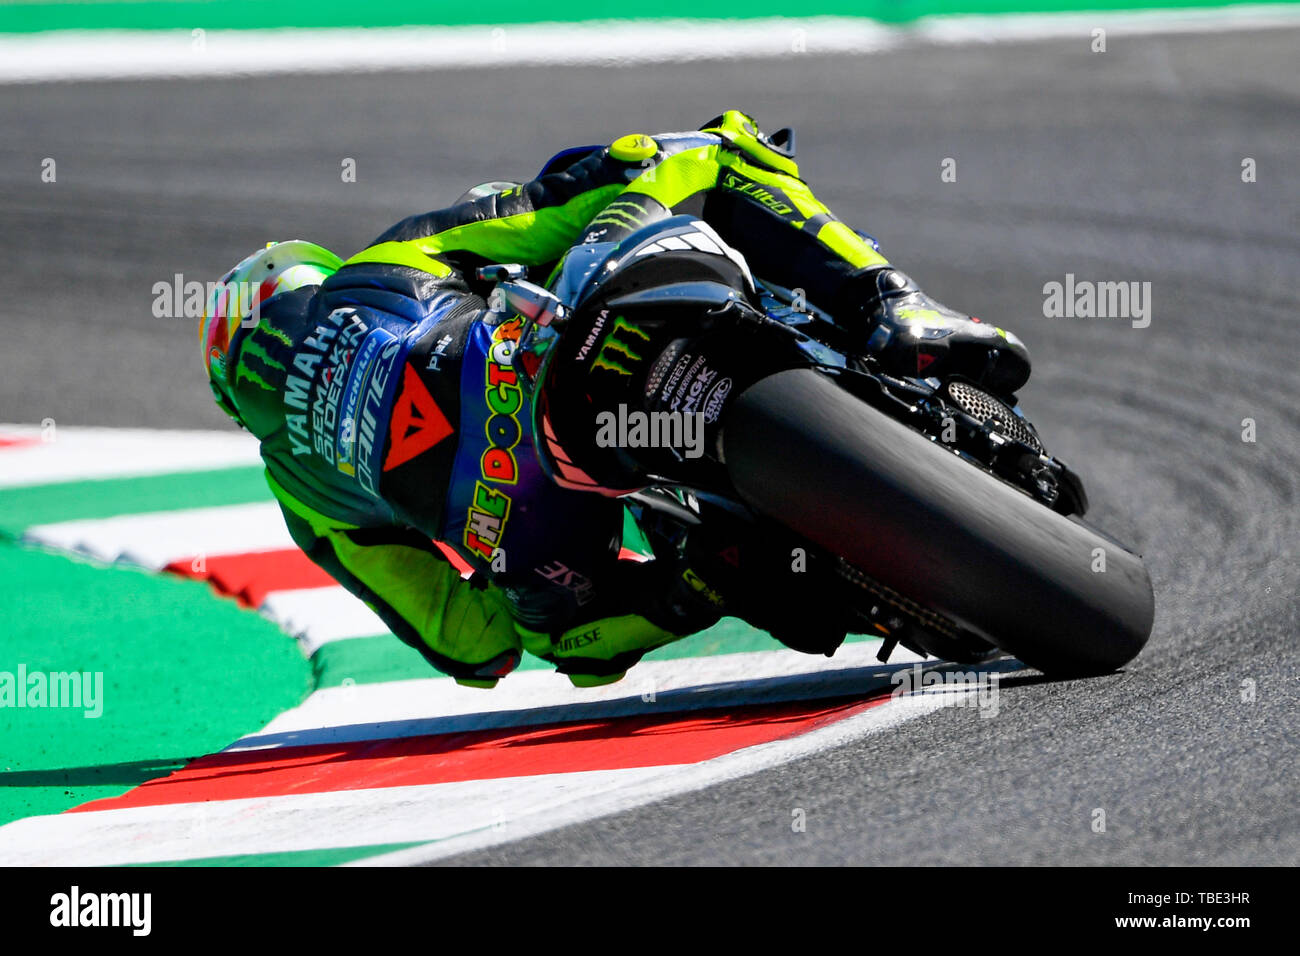 Mugello, Italy. 01st June, 2019. 46 Valentino Rossi during the FP3 Credit: Independent Photo Agency/Alamy Live News Stock Photo